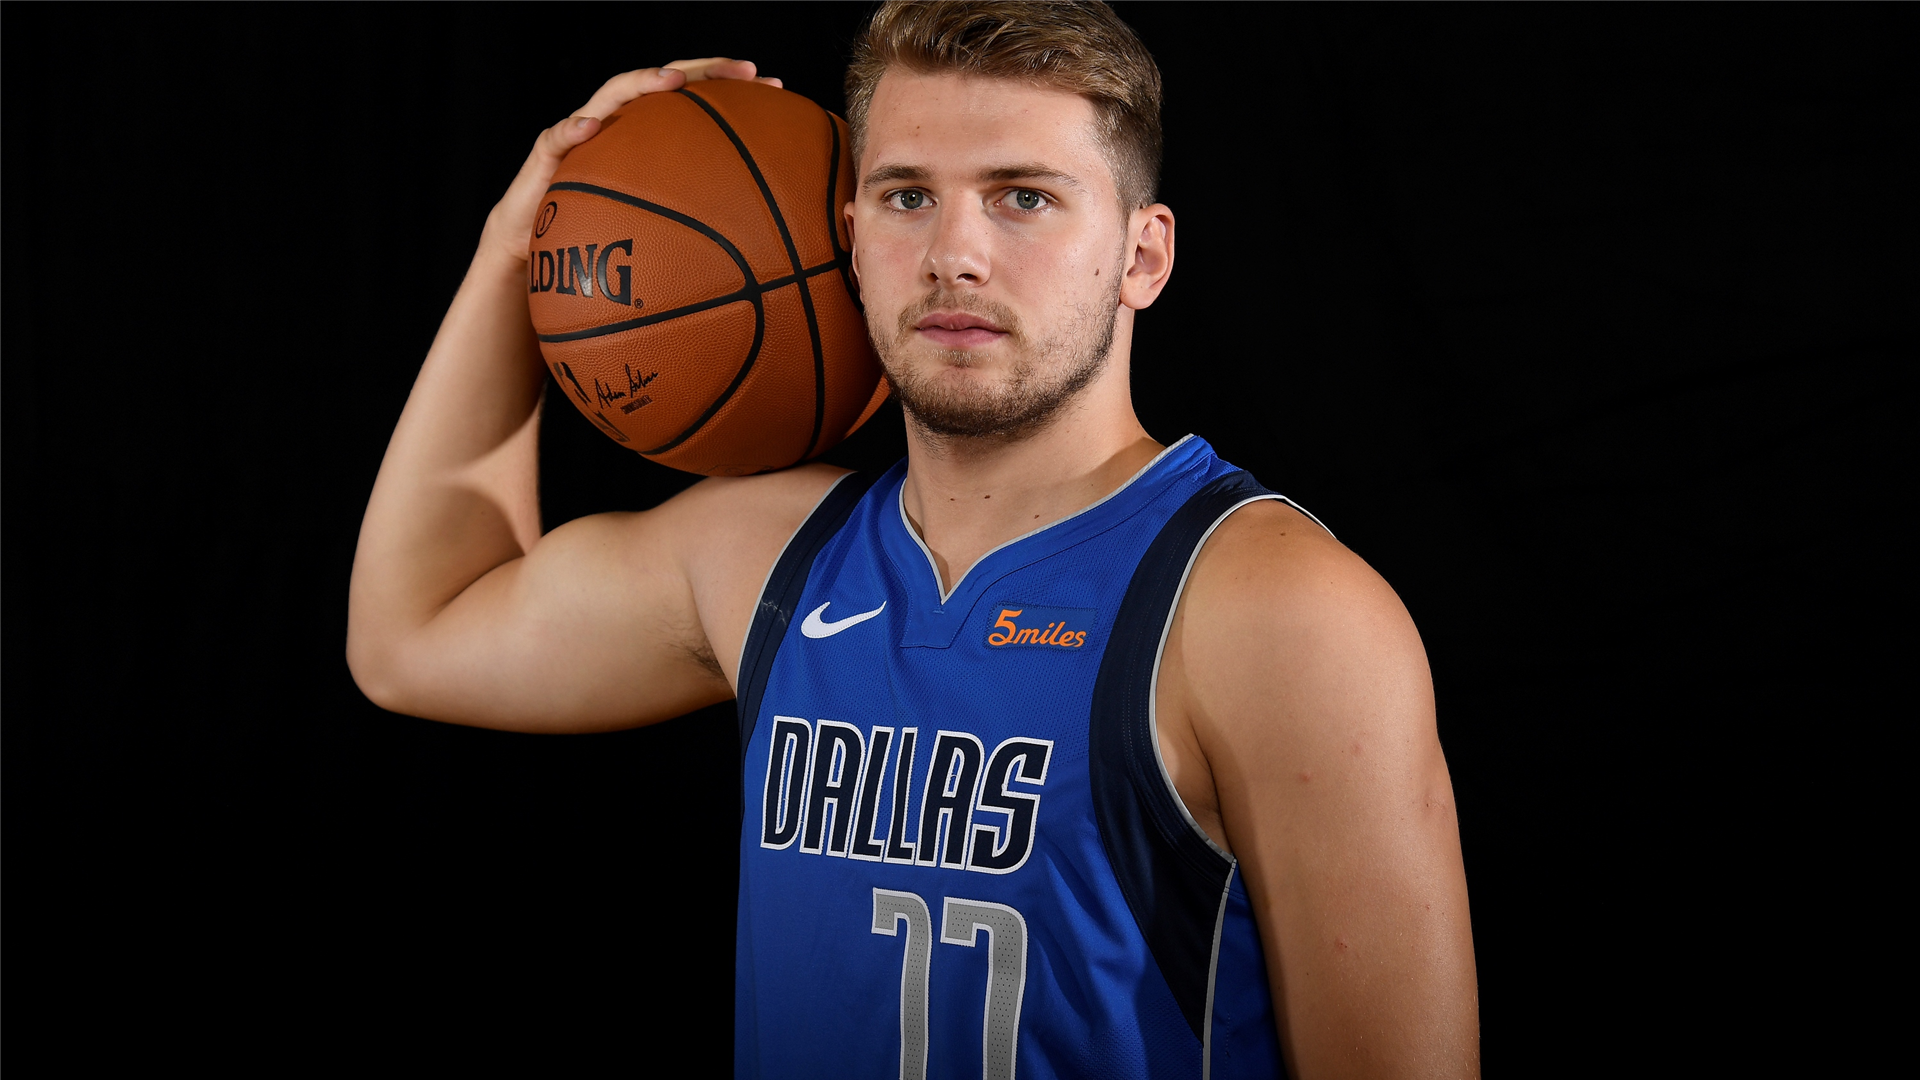 Luka Doncic is next in line among the most anticipated international debuts - Sporting News